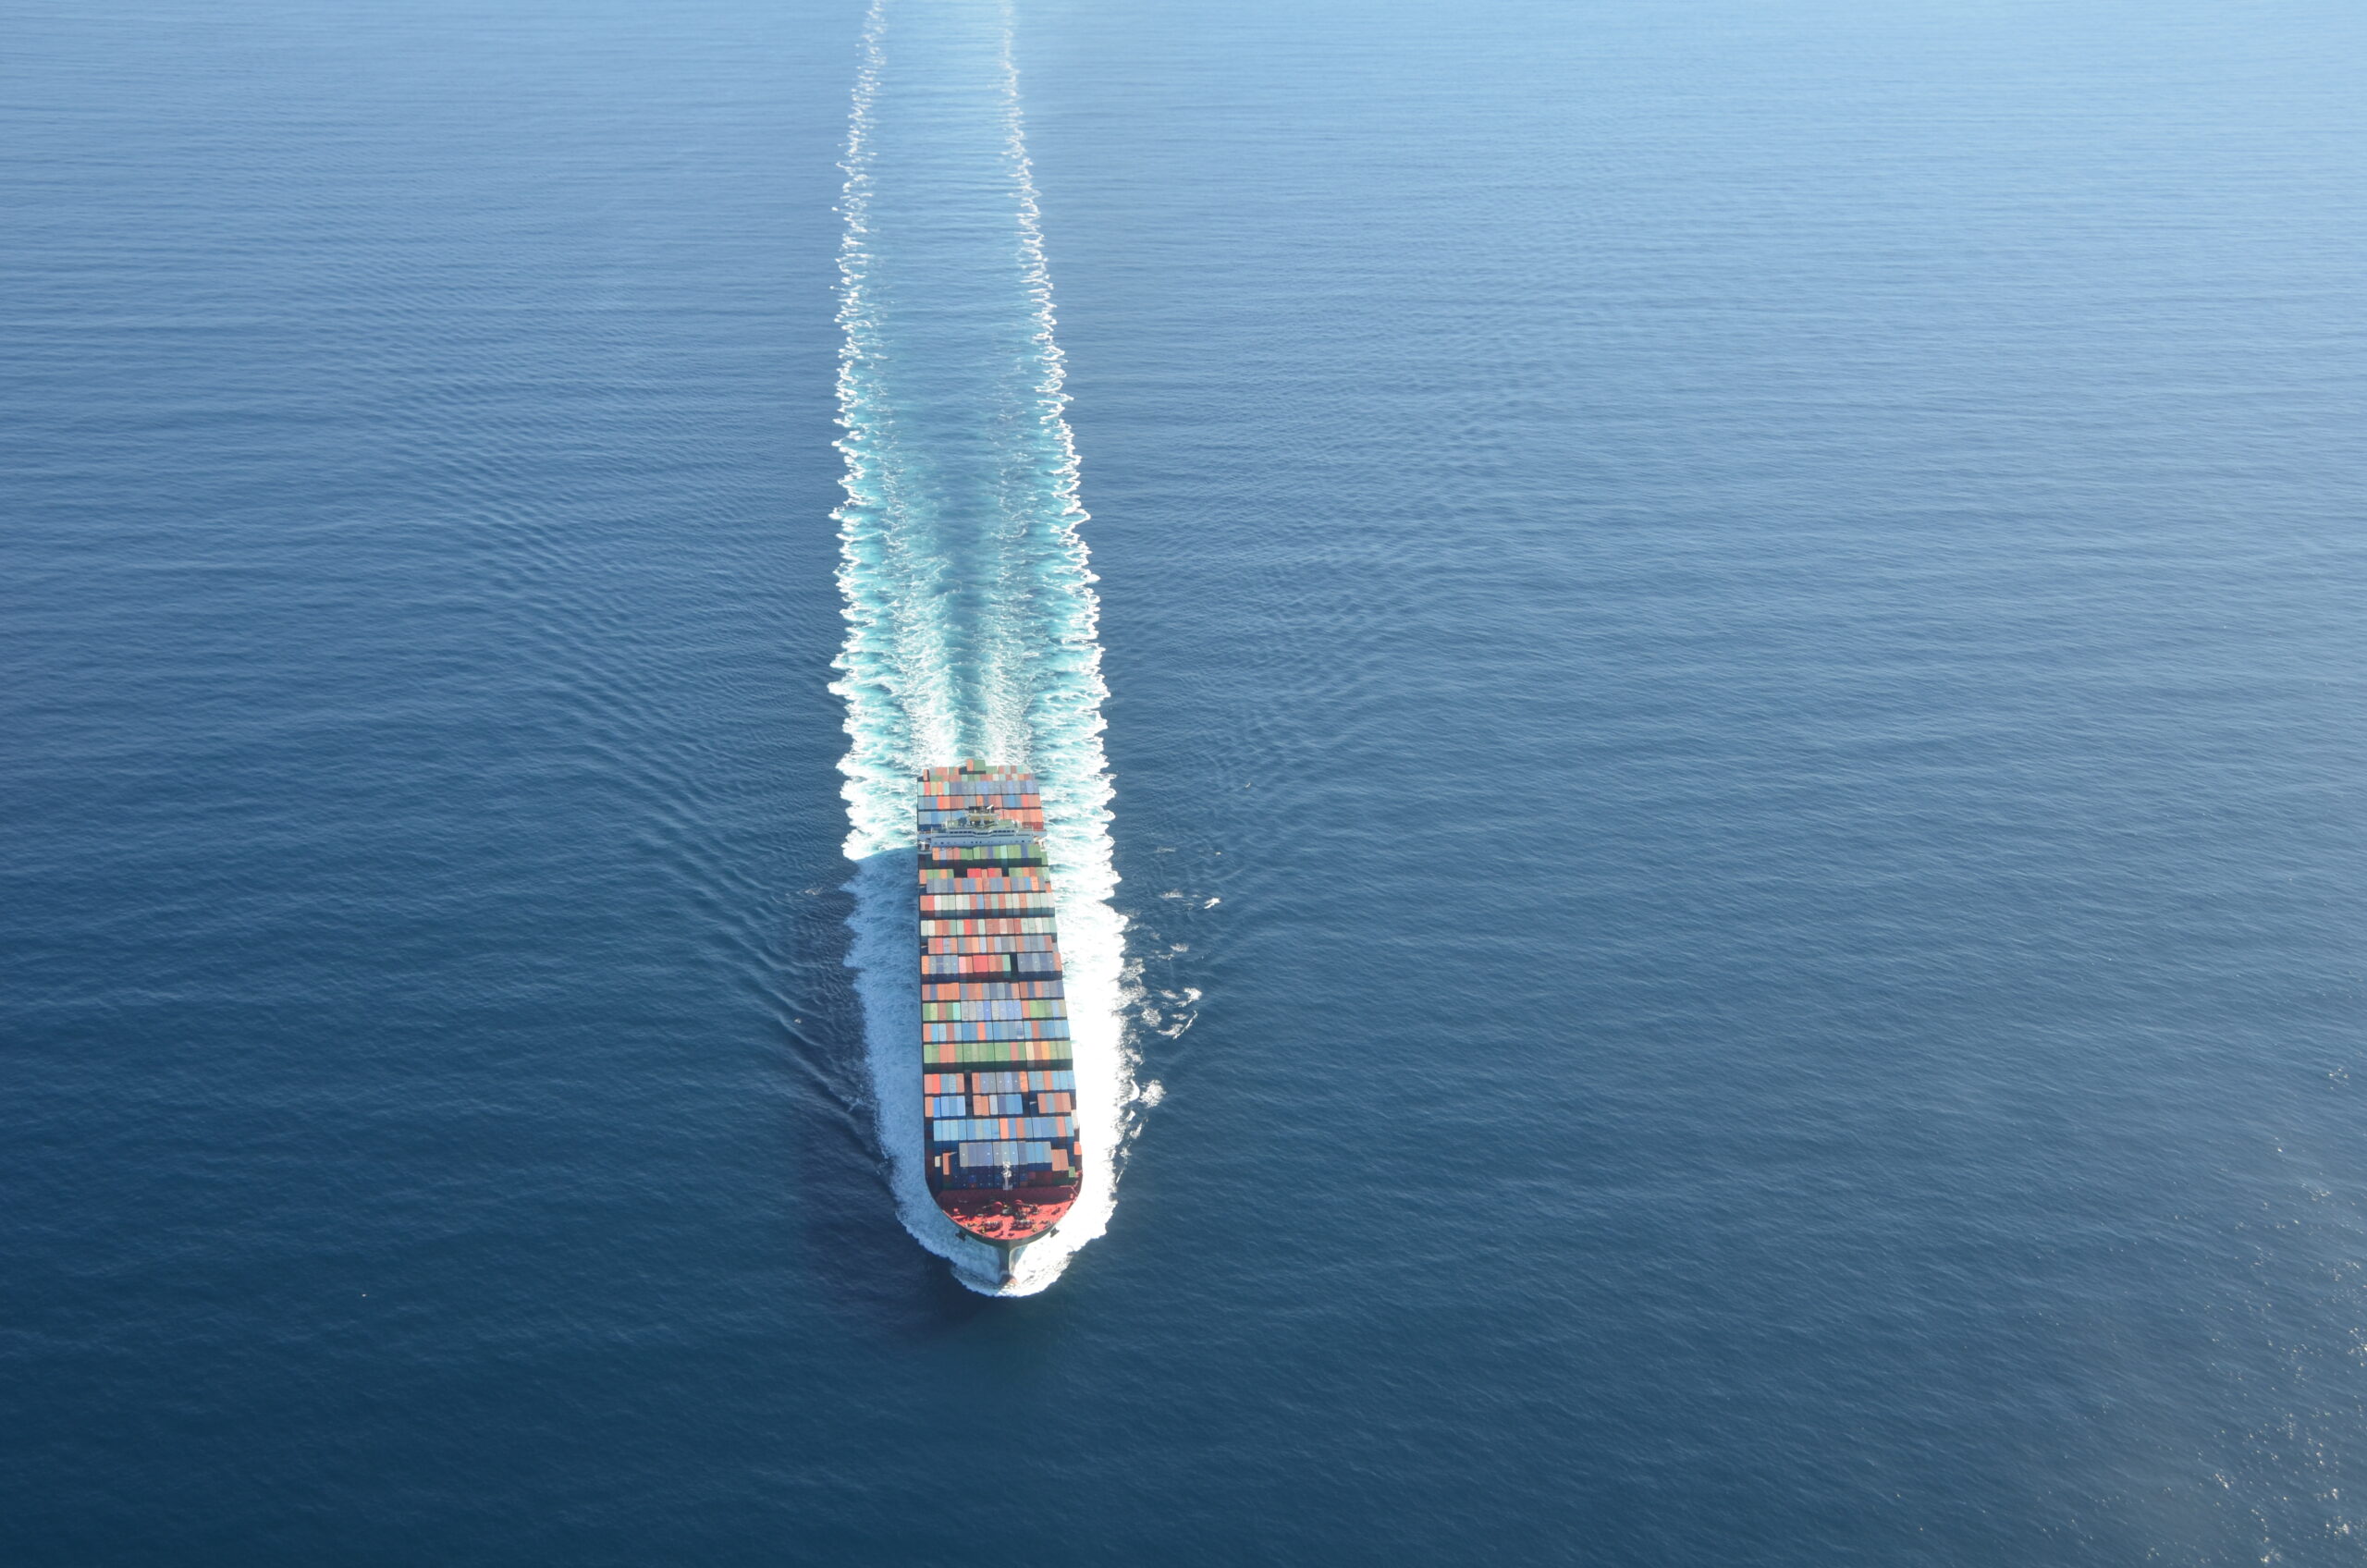 Large cargo ship sails toward the out edge of the photo frame.